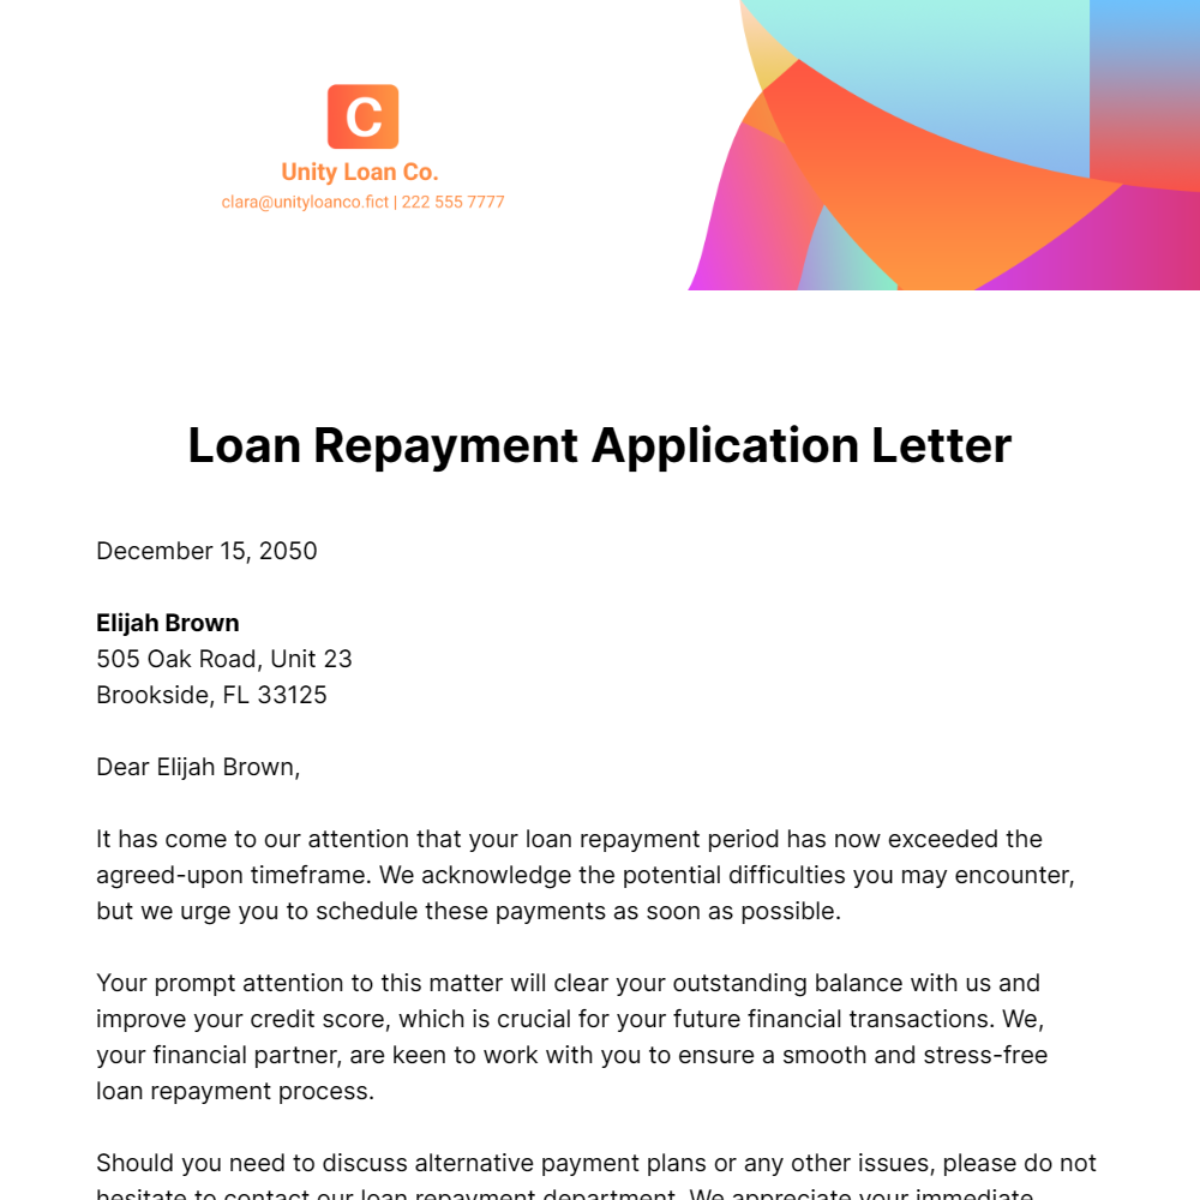 Loan Repayment Application Letter Template